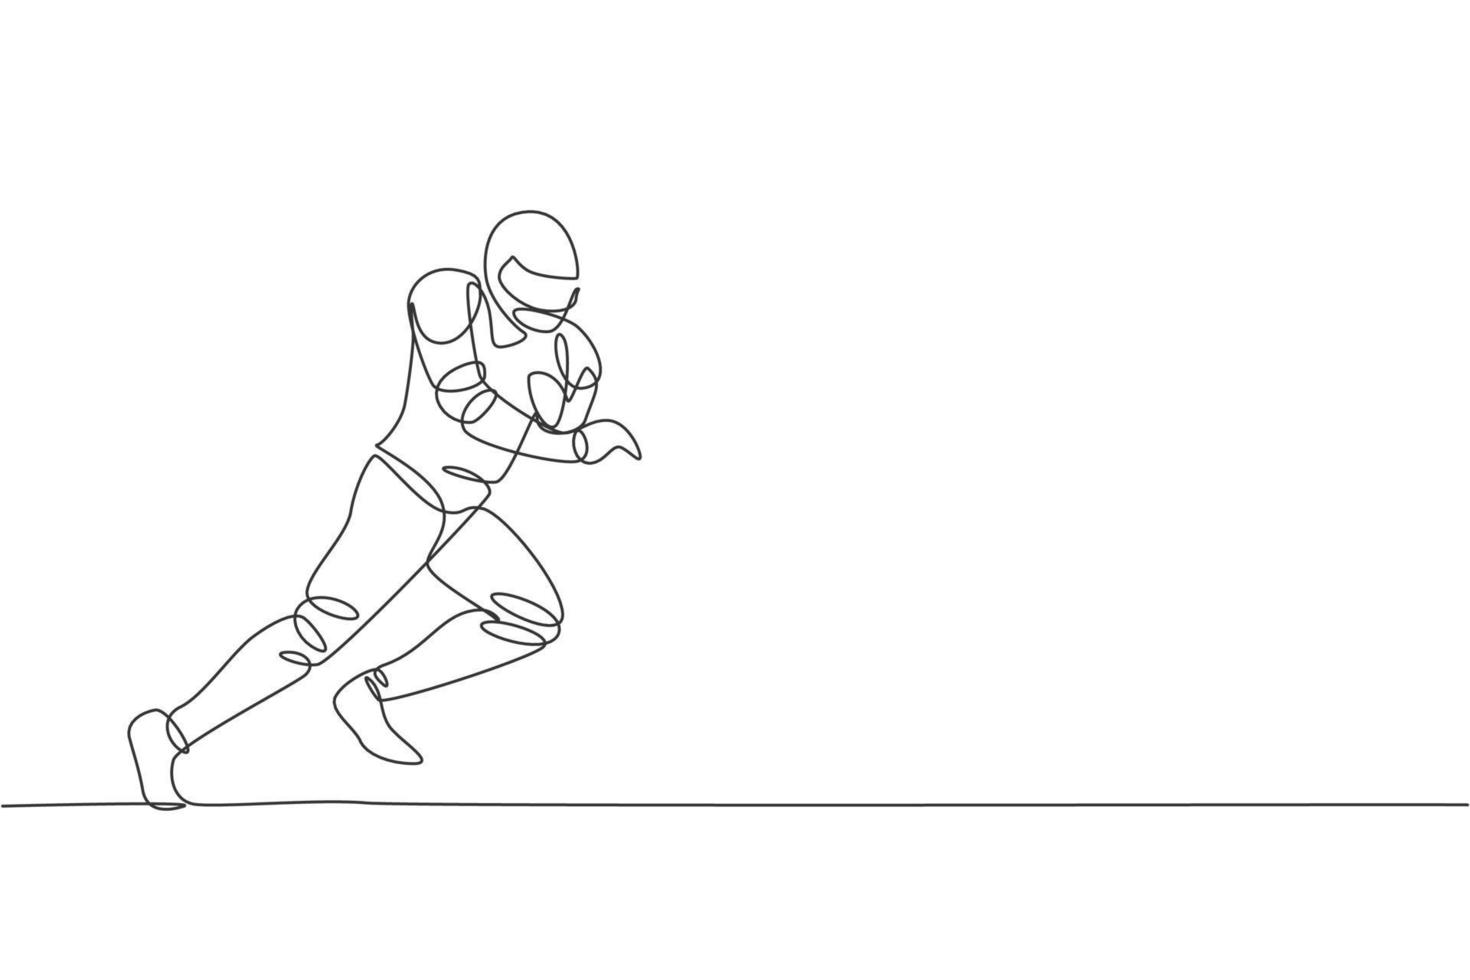 Single continuous line drawing young agile american football player running fast to score a goal for competition media. Sport exercise concept. Trendy one line draw design vector graphic illustration